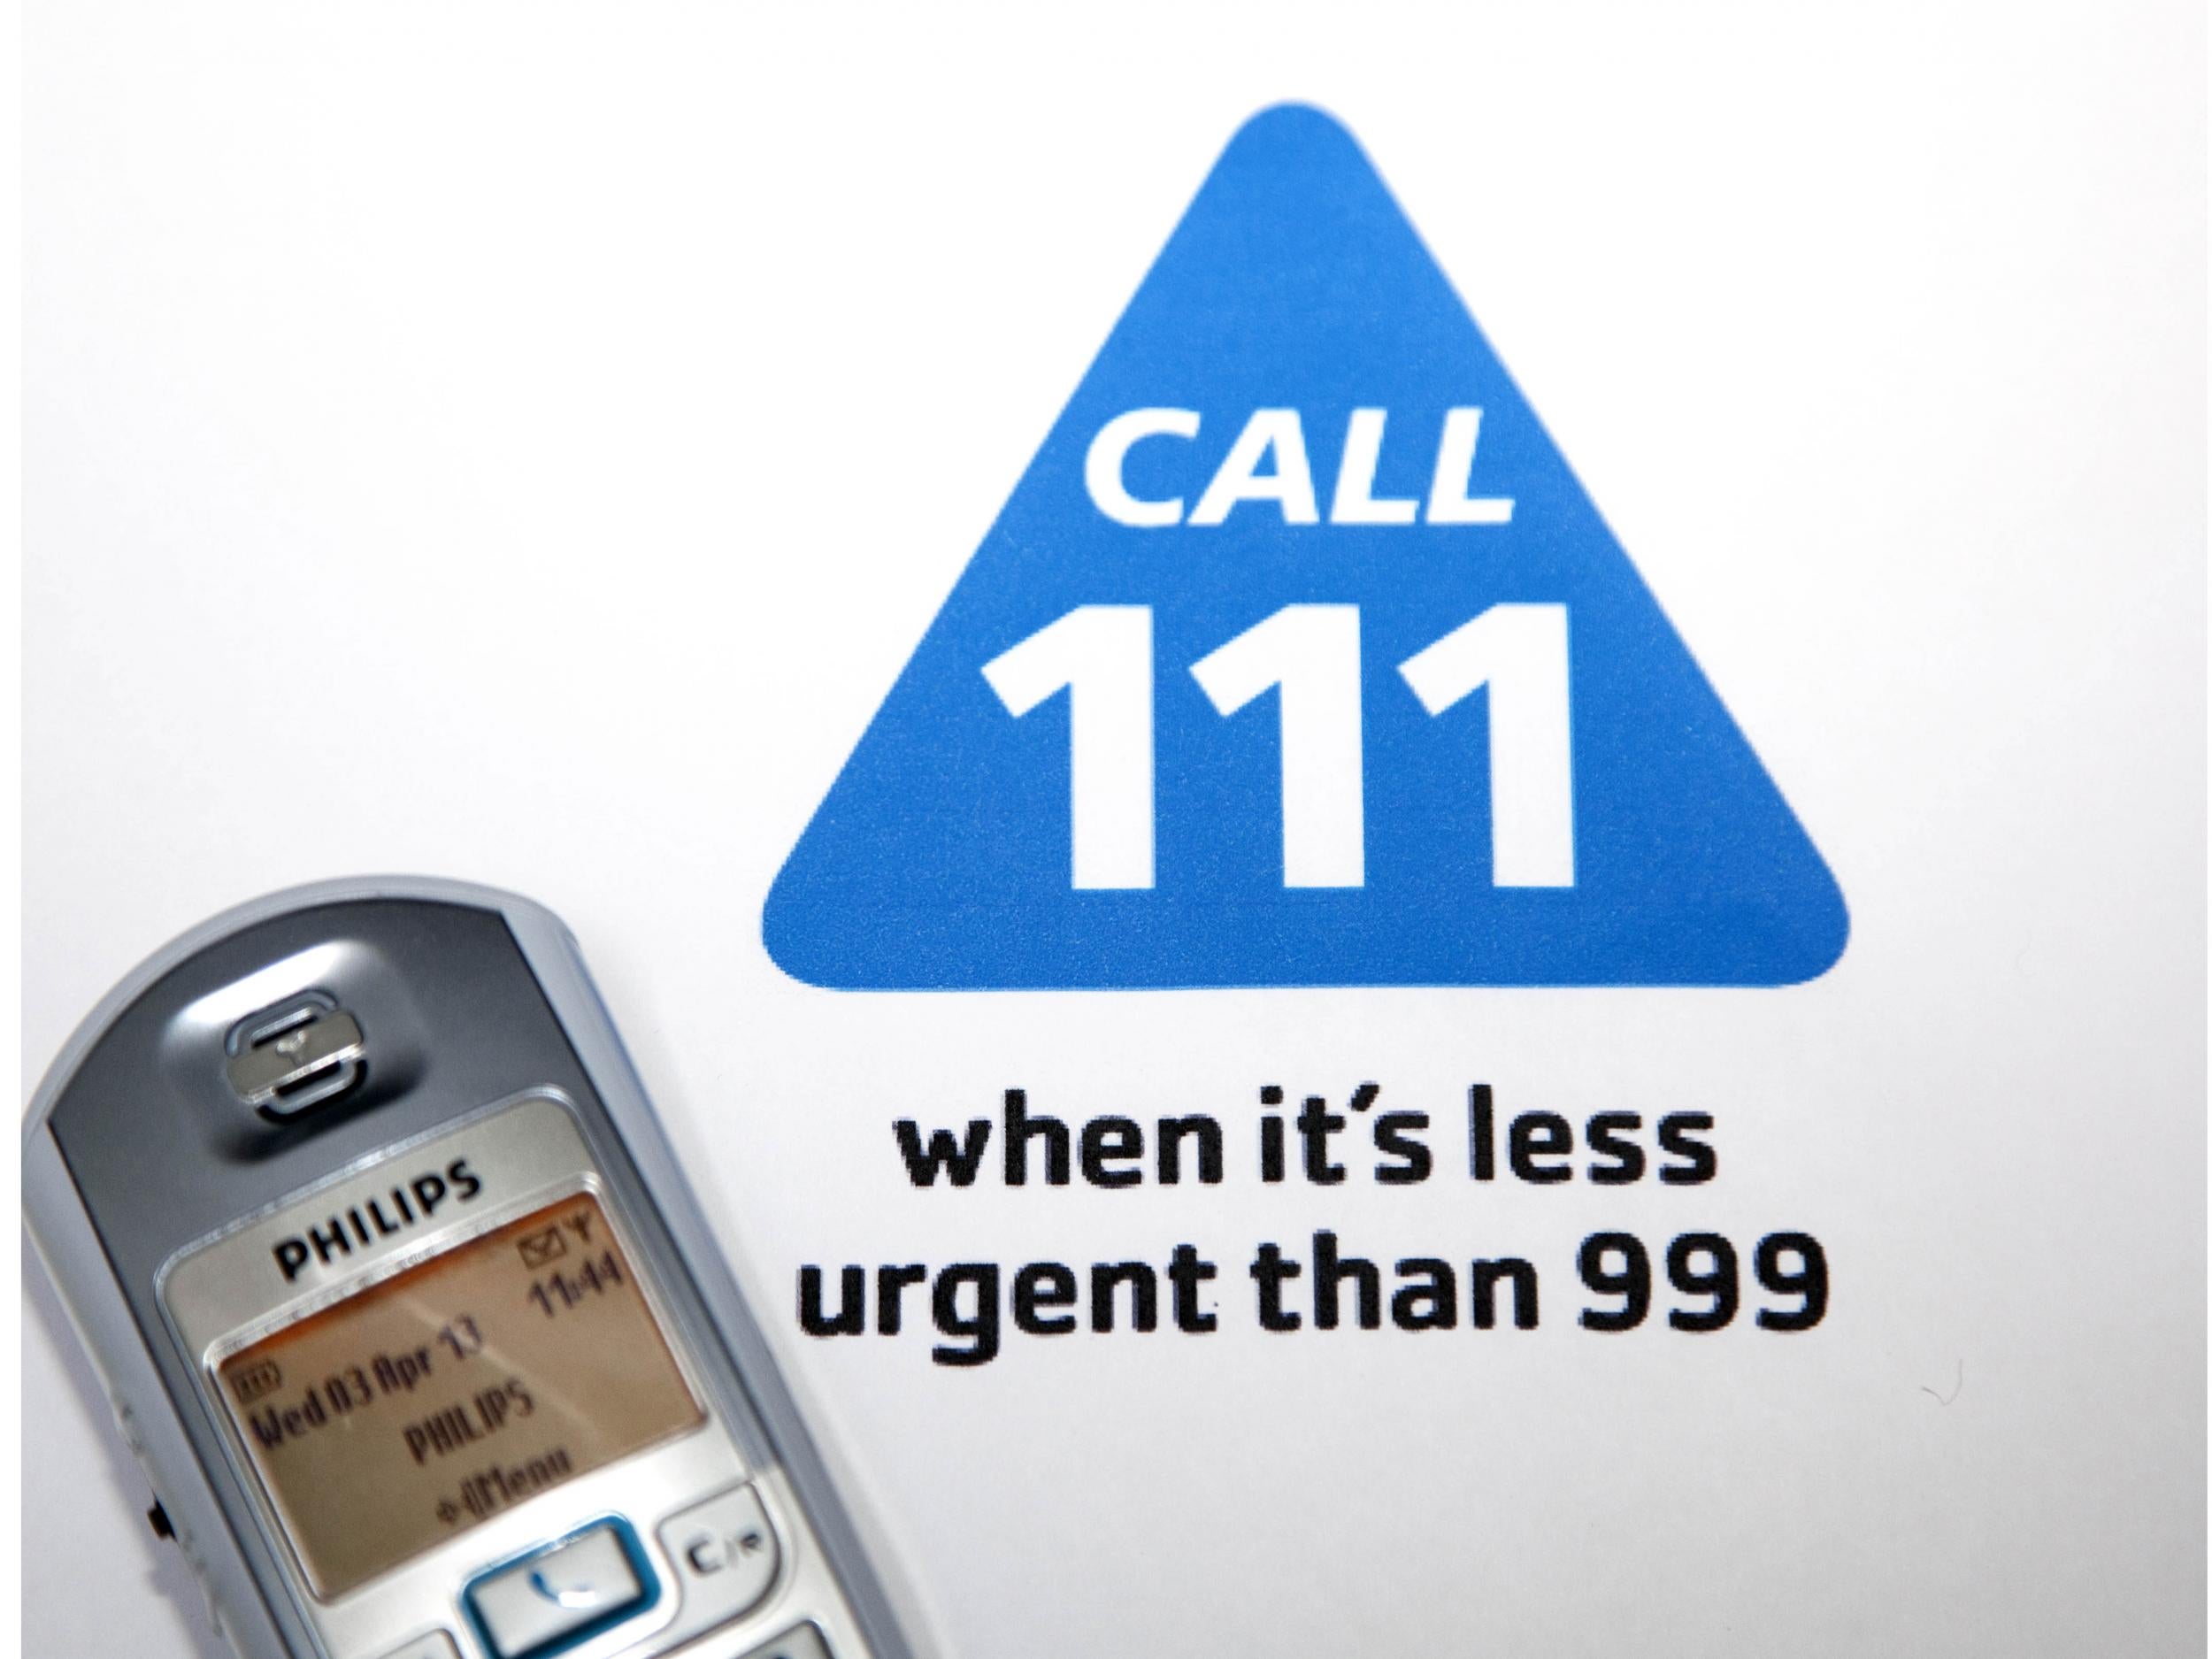 The NHS 111 number for non-emergency medical calls